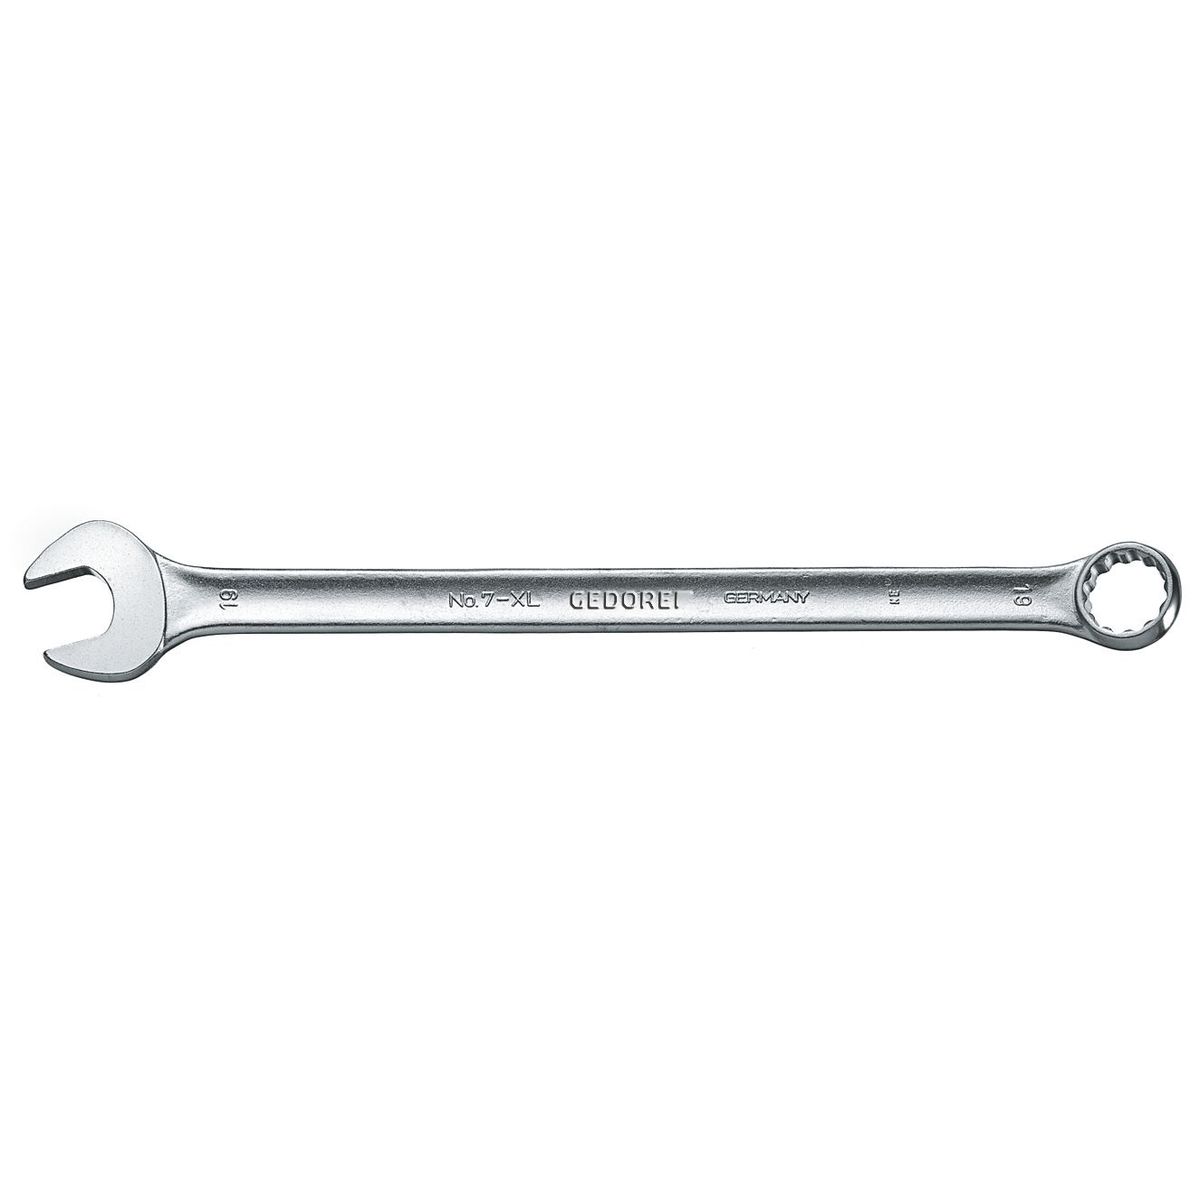 Combination spanner, extra long 19mm No.7 XL 19 Gedore